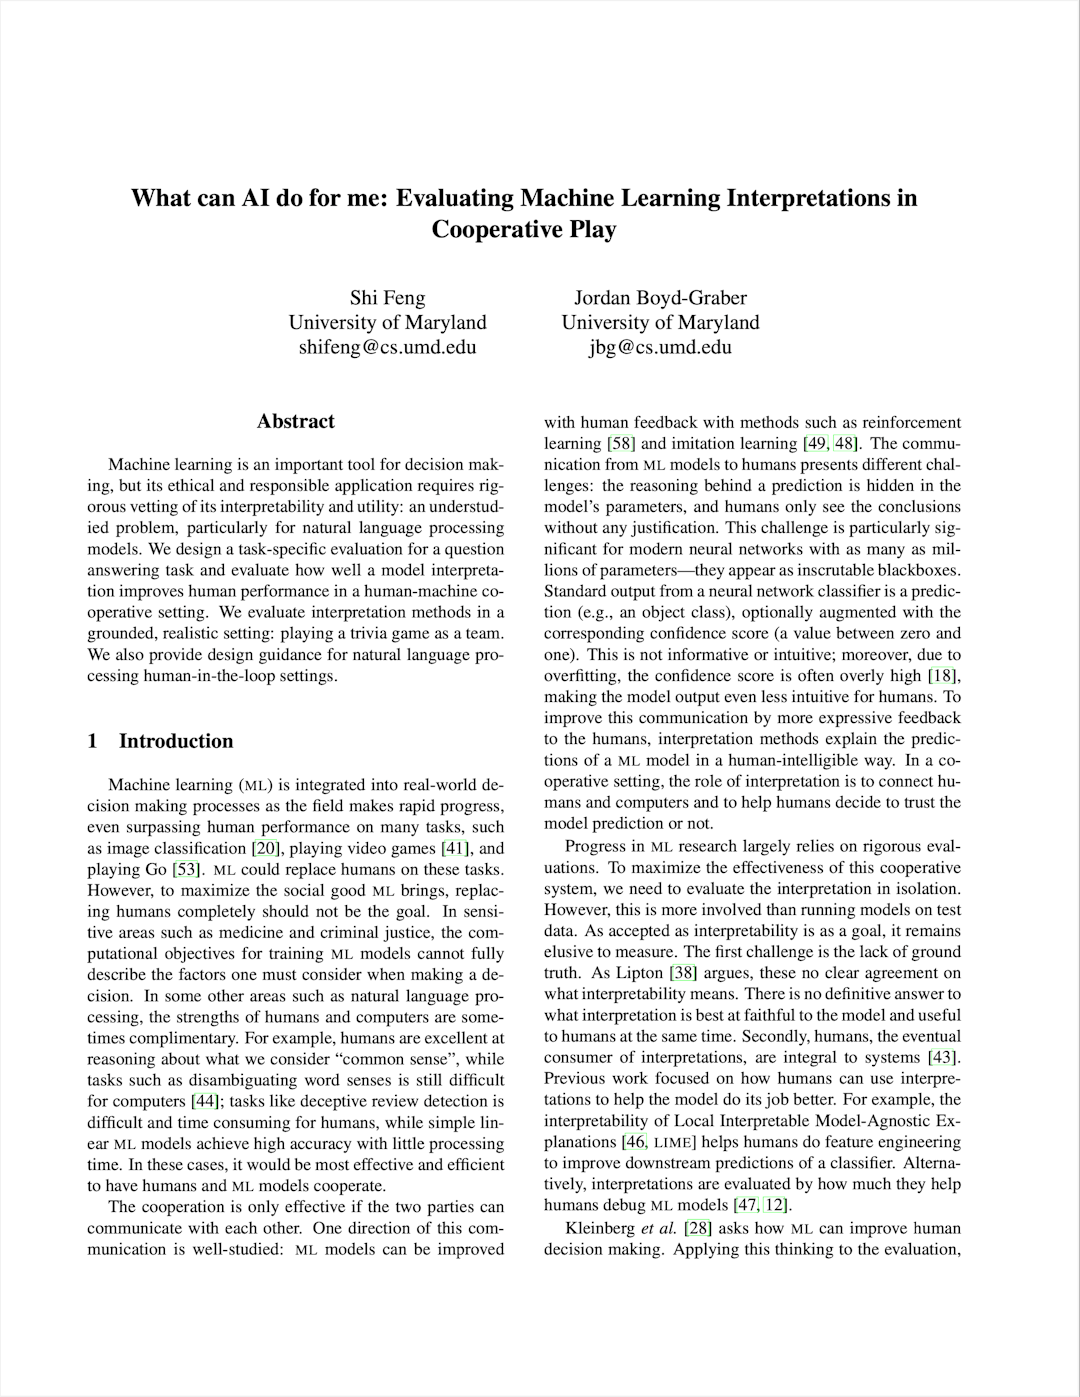 What can AI do for me: Evaluating Machine Learning Interpretations in Cooperative Play